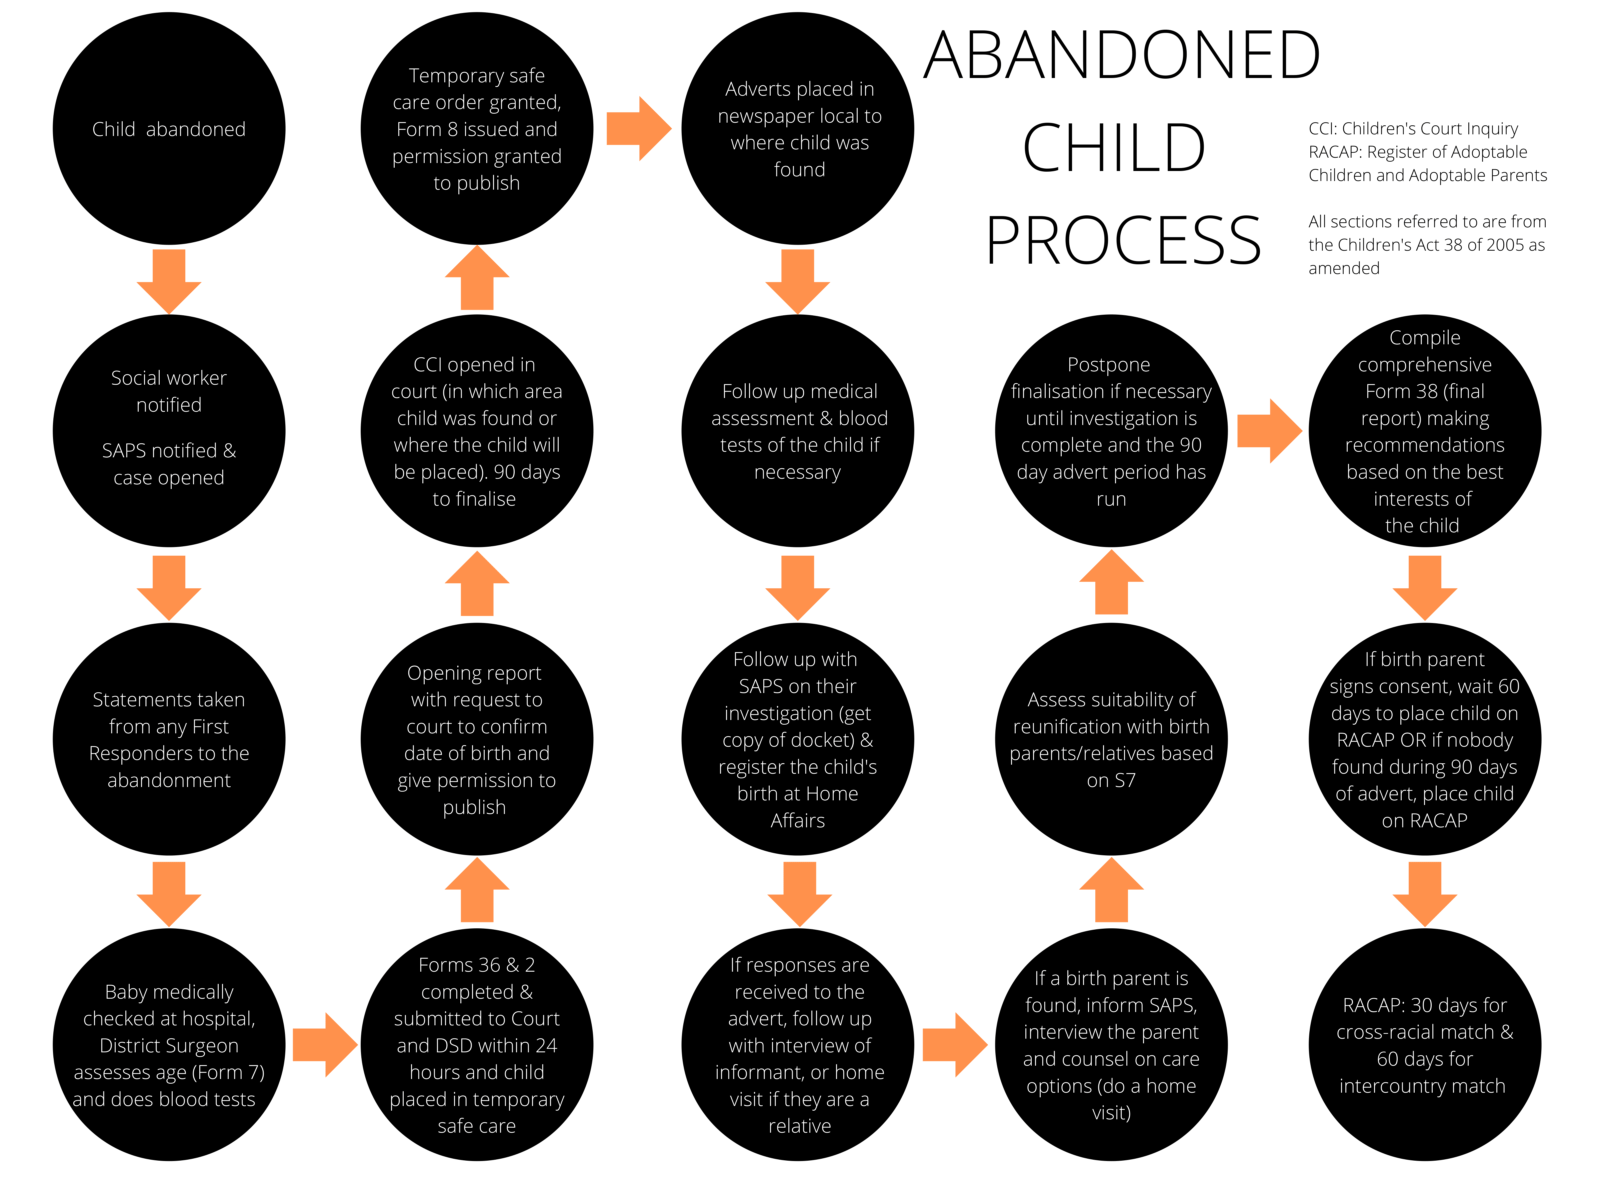 Abandoned Child Process Infographic 2